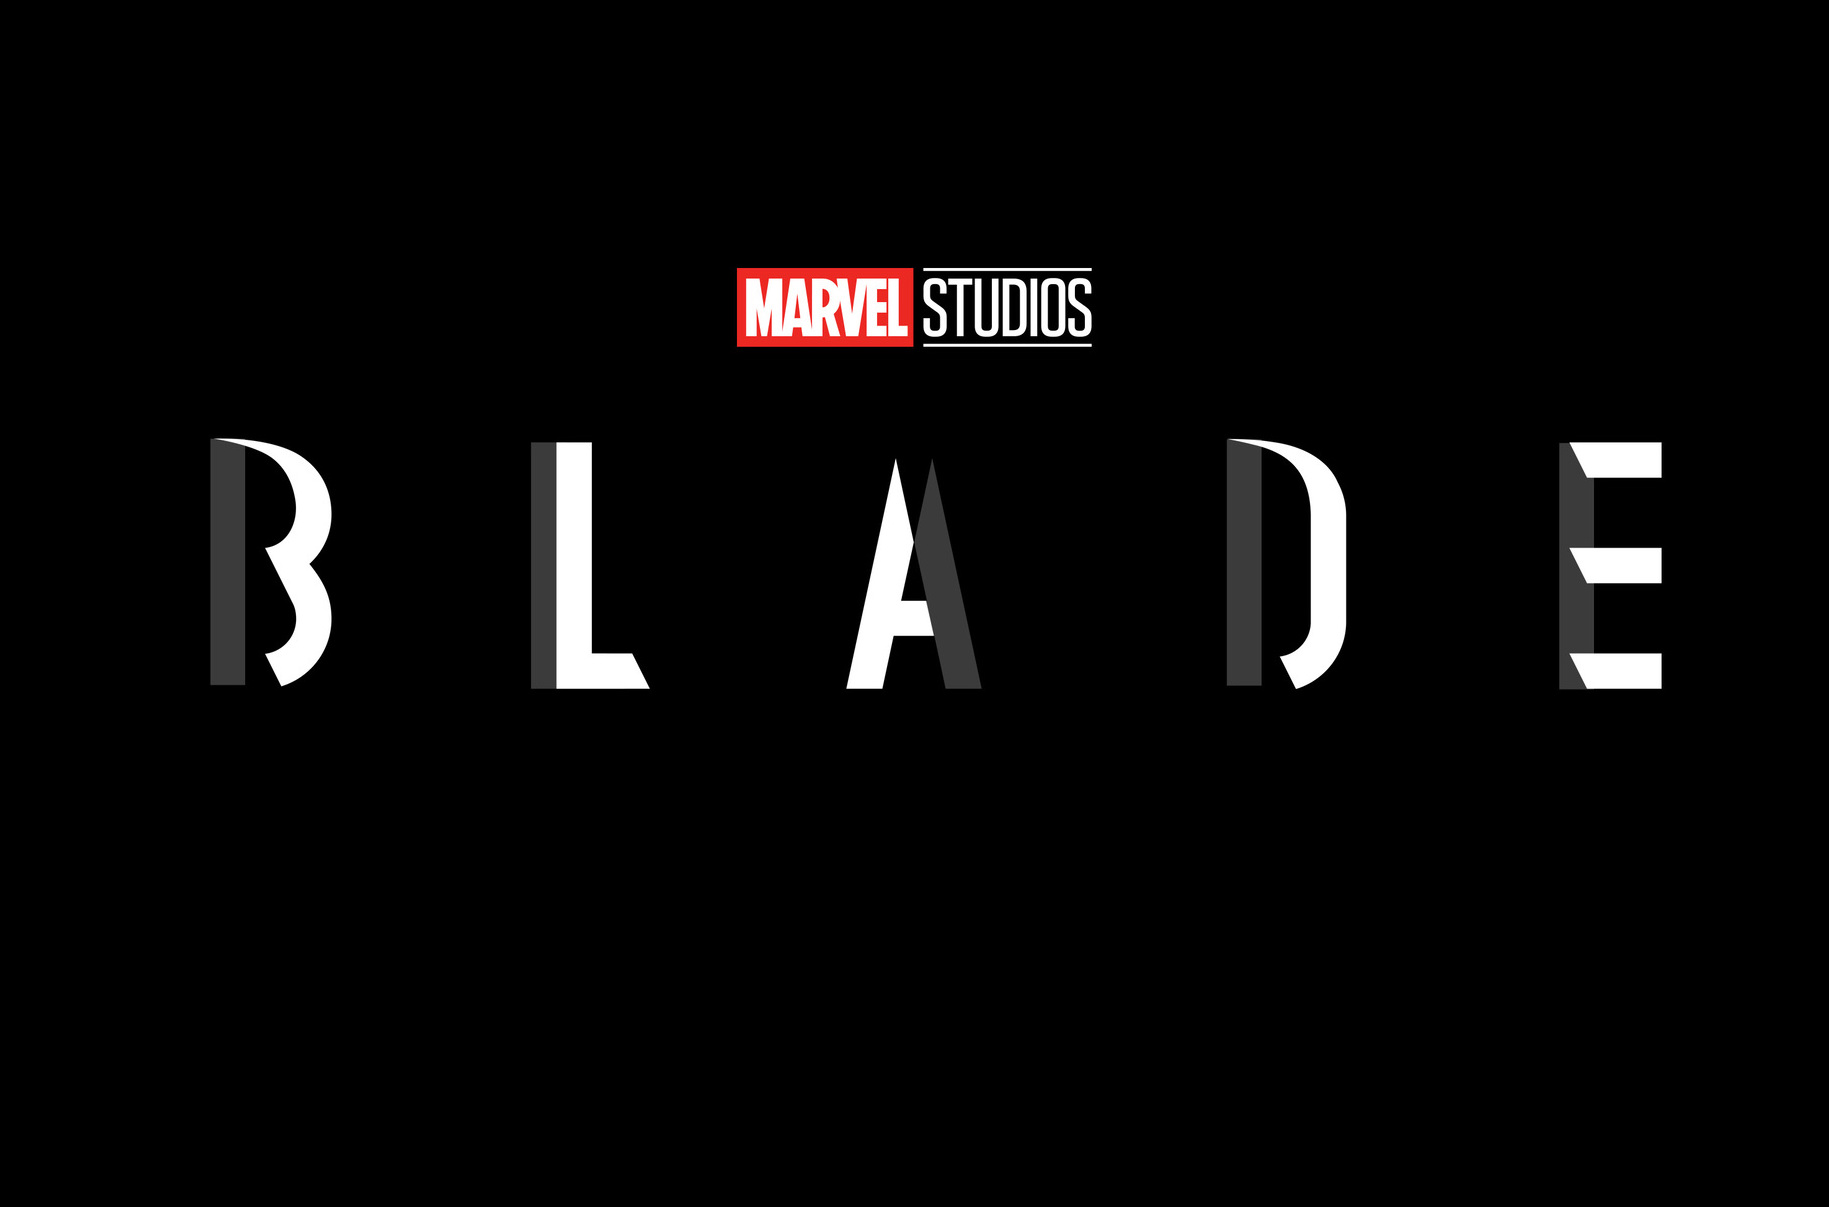 Marvel Announce "Blade" At SDCC | What's On Disney Plus